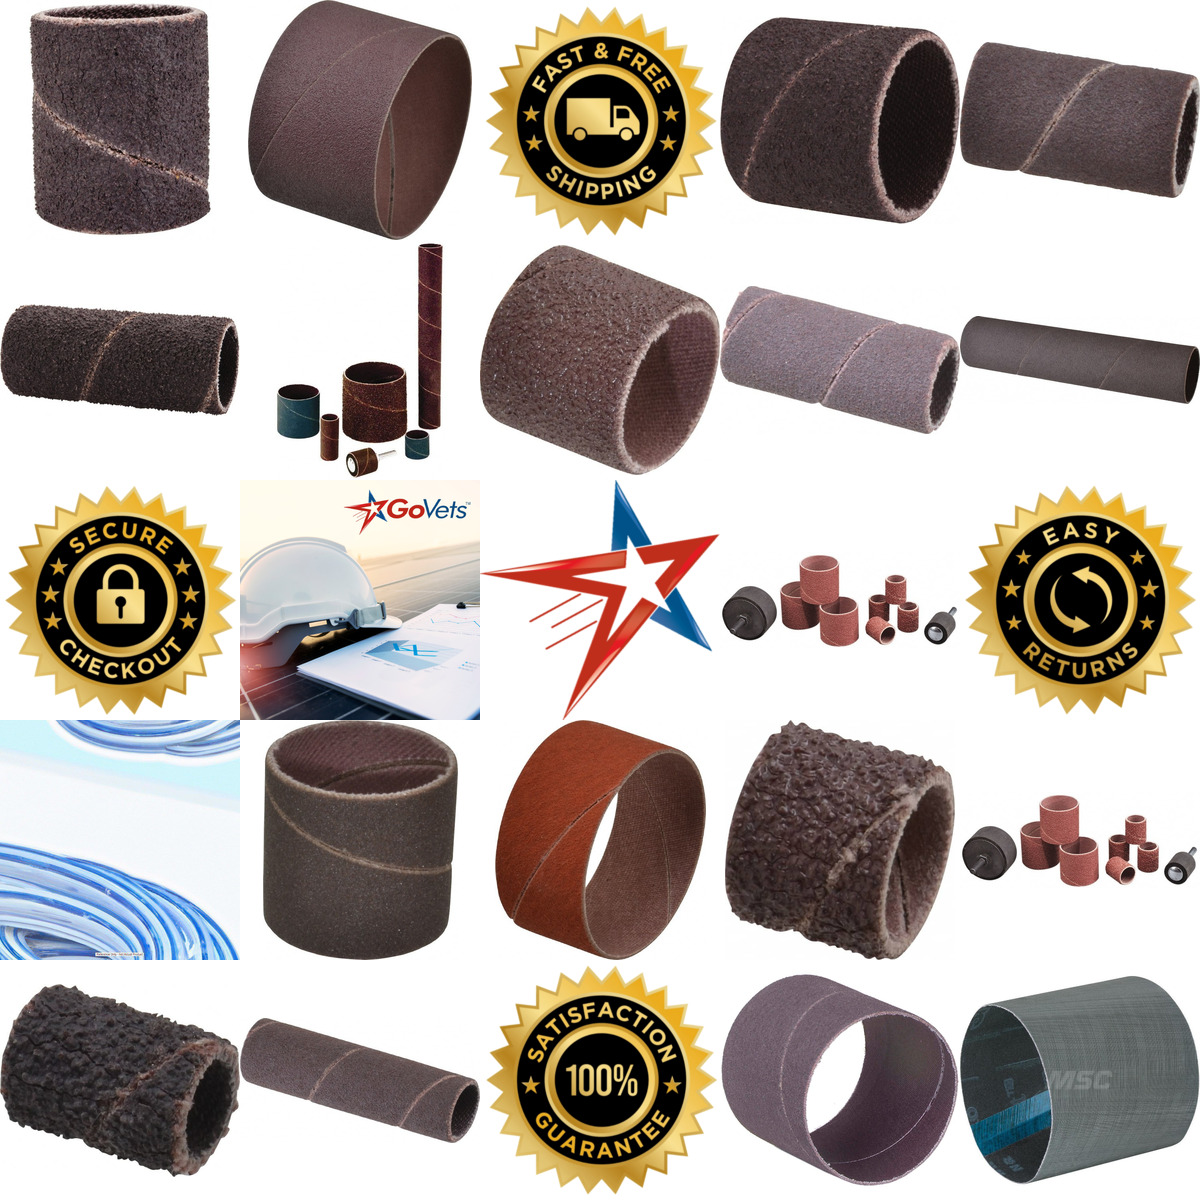 A selection of Spiral Bands products on GoVets